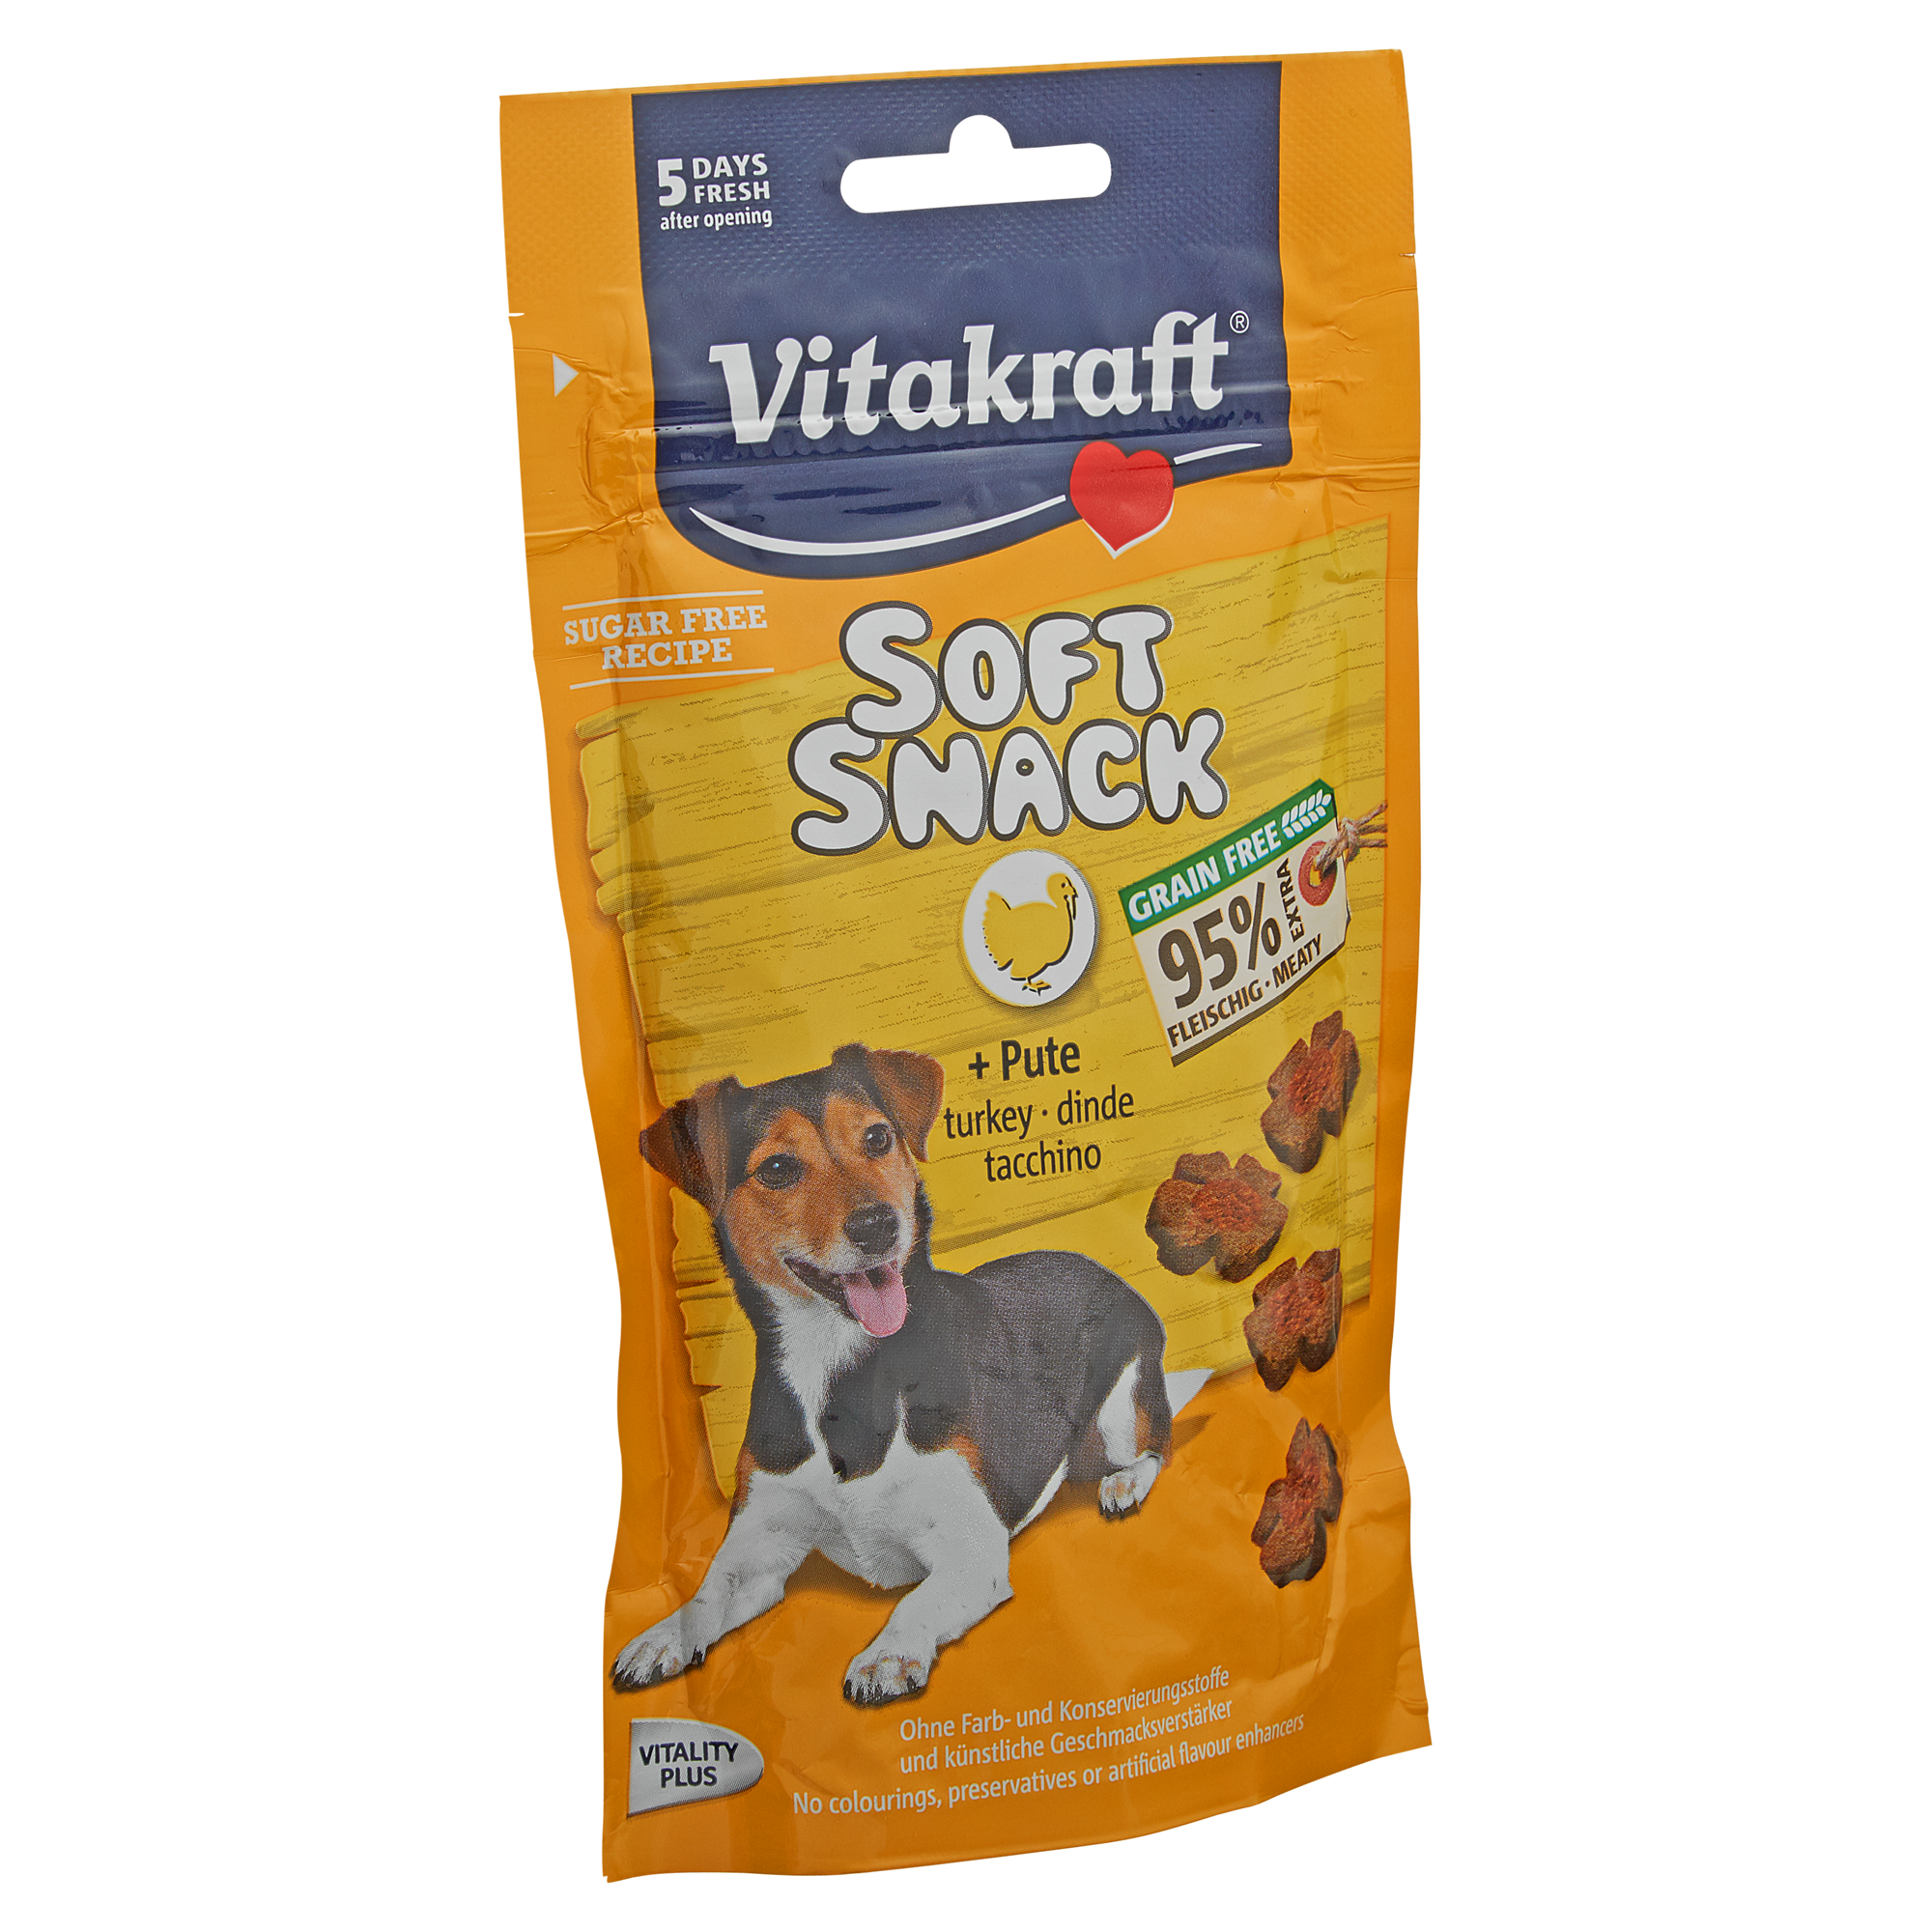 Hundesnack "Soft Snack" mit Pute 55 g + product picture